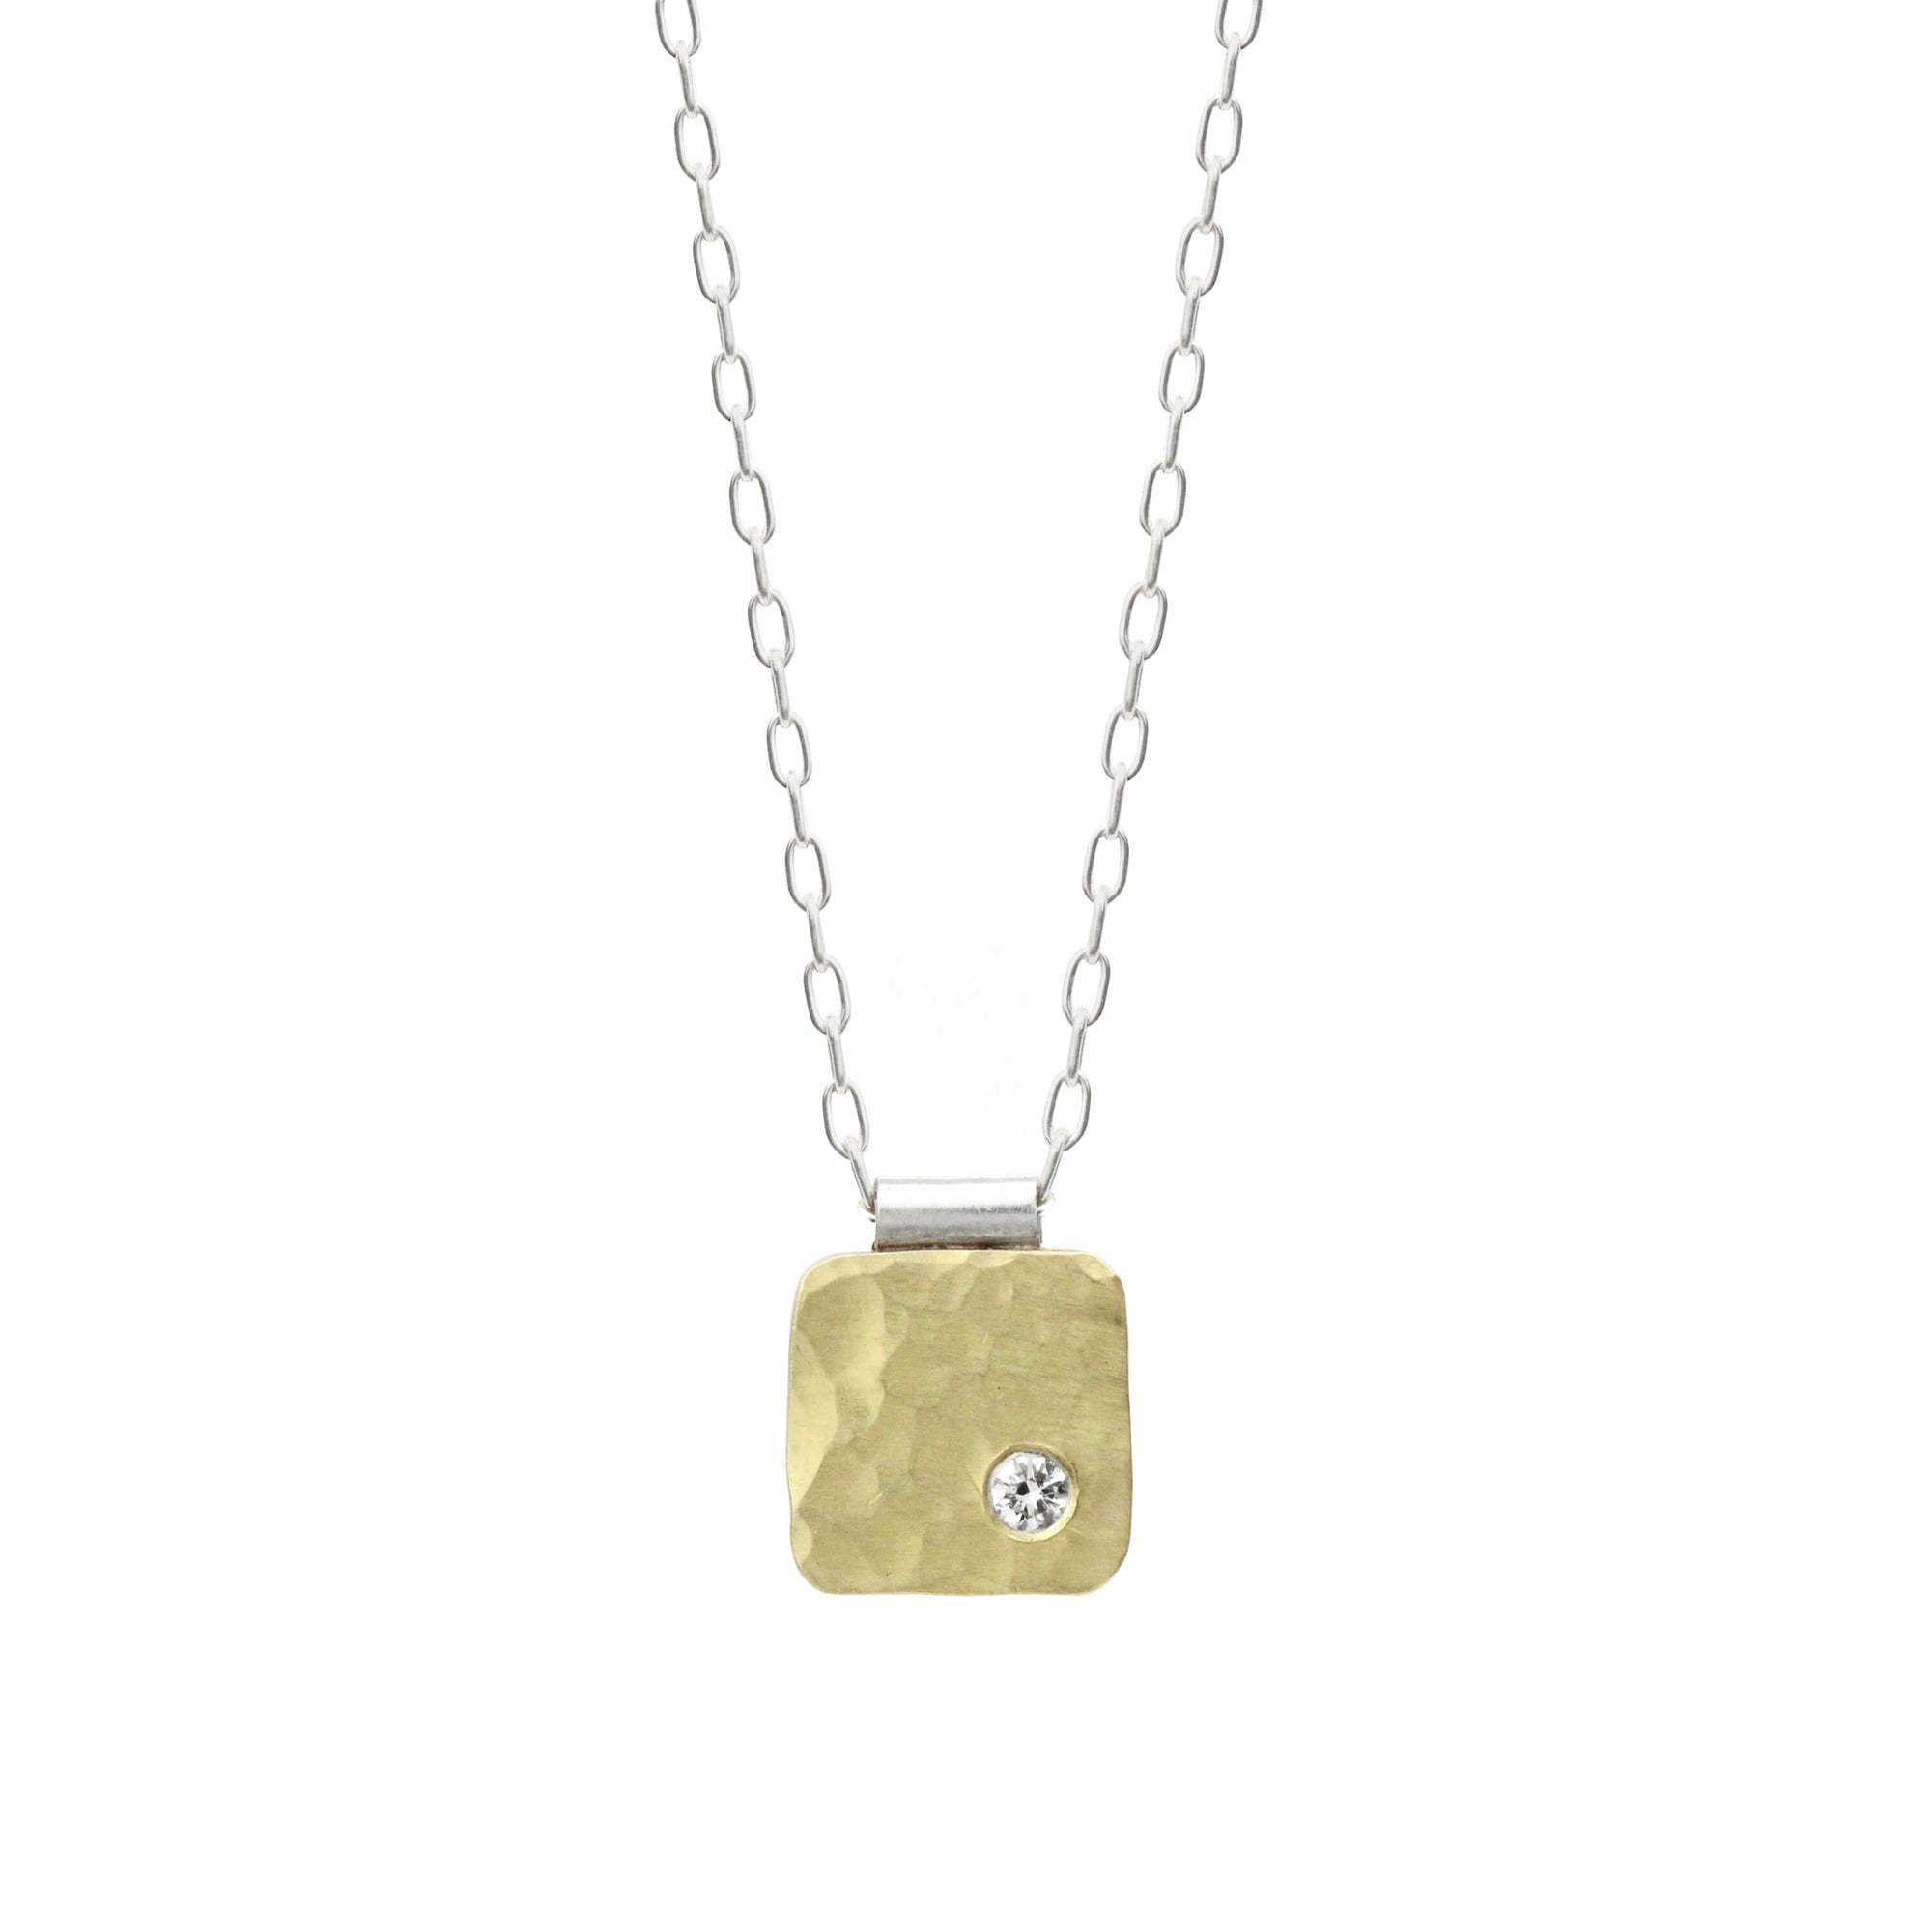 8mm cell pendant in hammered yellow gold with white diamond accent. Handmade by EC Design Jewelry in Minneapolis, MN using recycled metal and conflict-free stone.